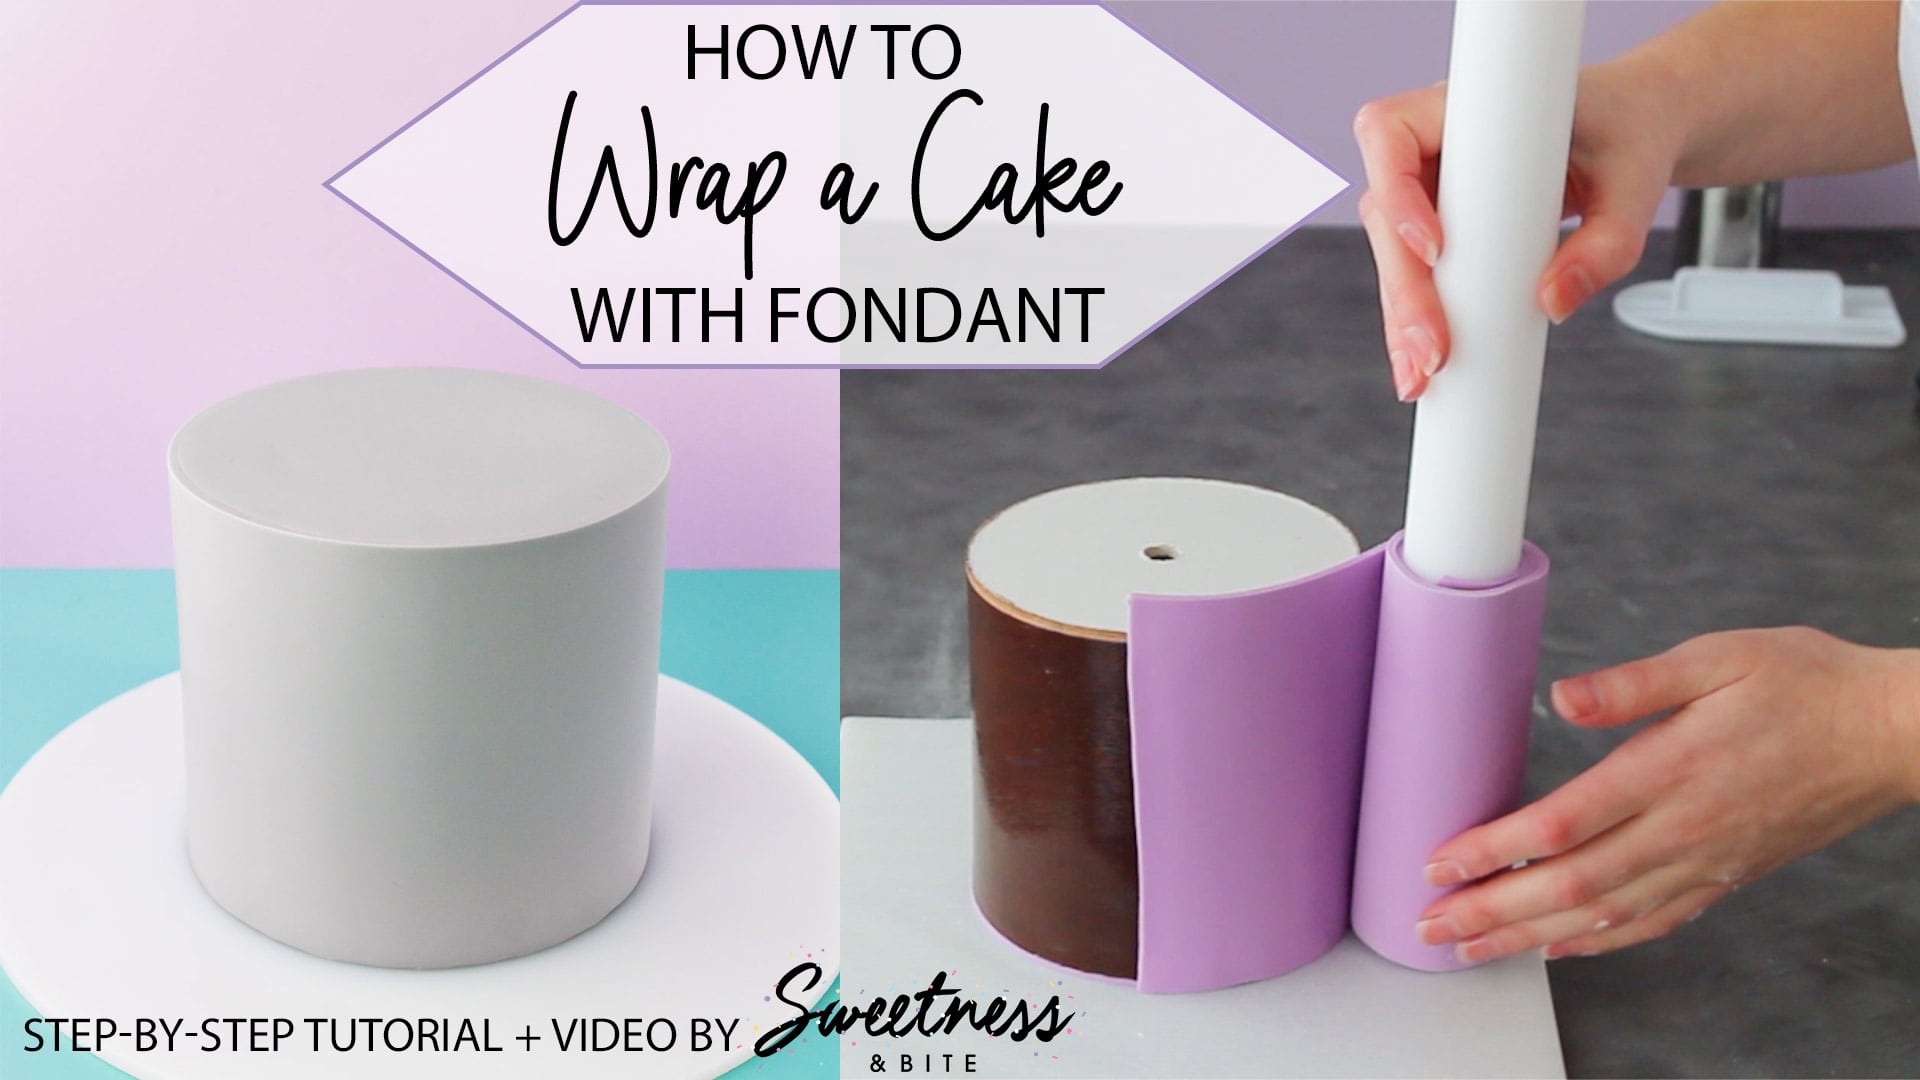 How to Work with Fondant